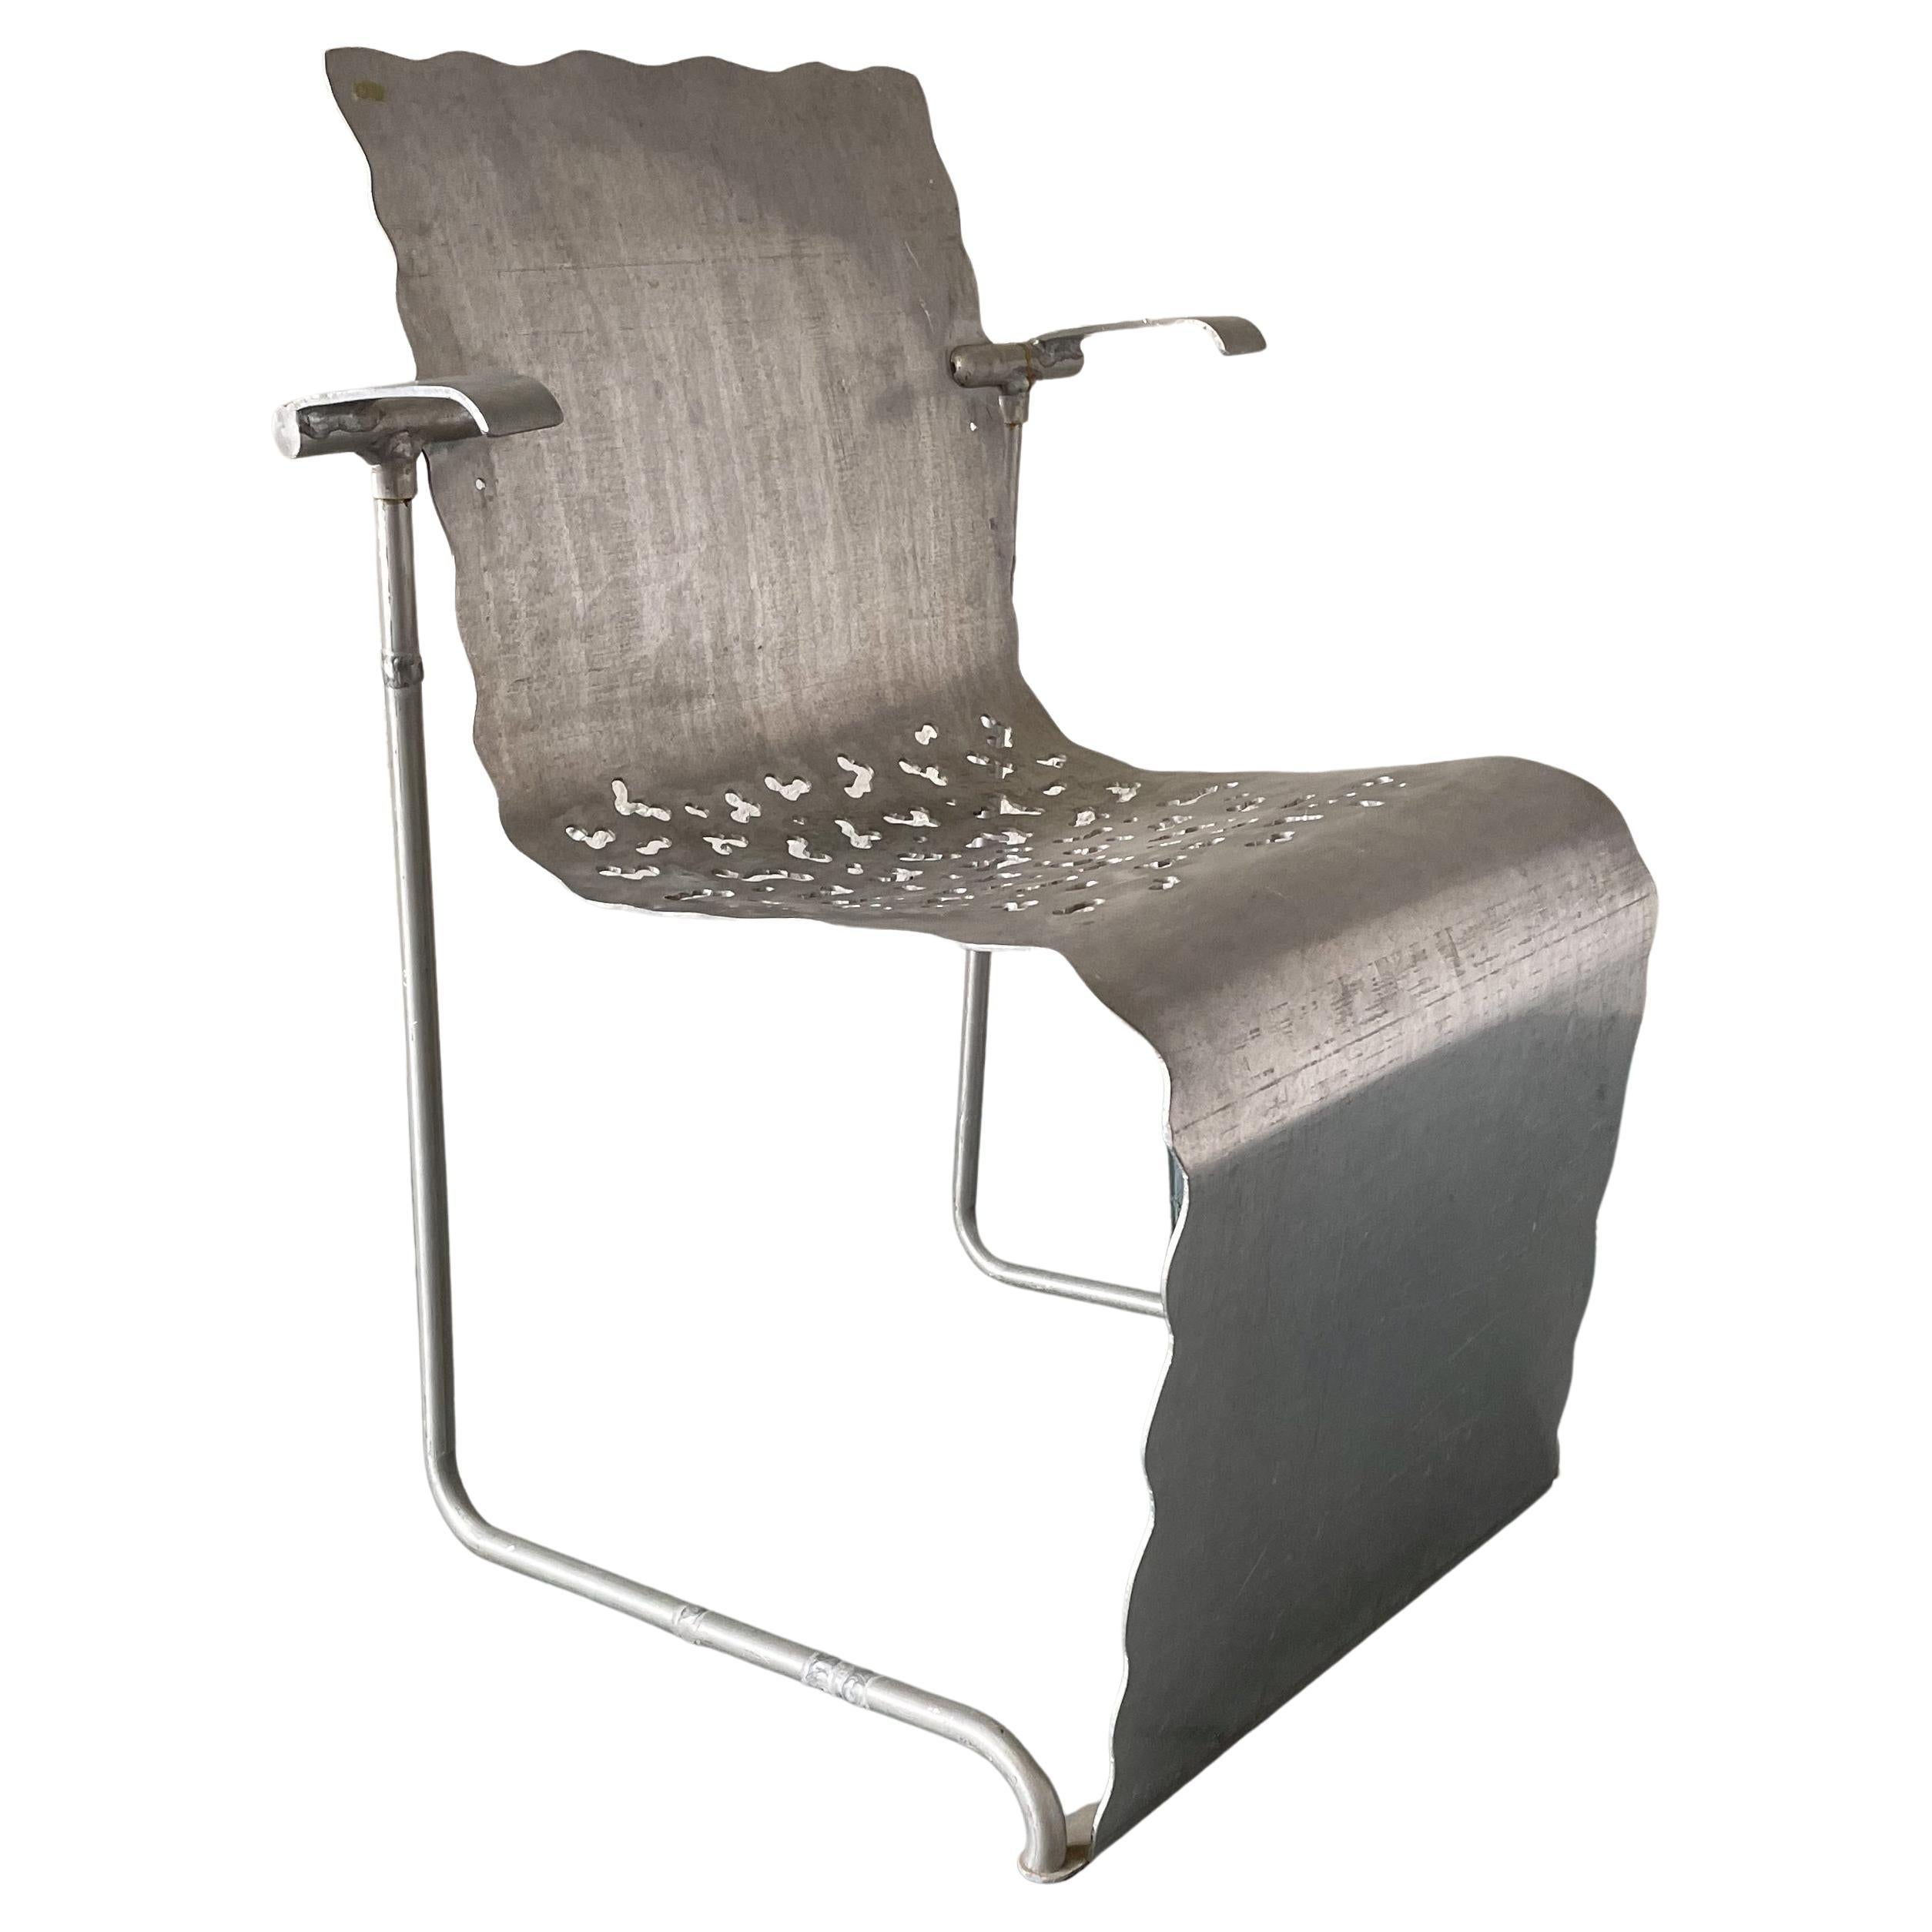 Richard Schultz Prototype Aluminum Stacking Chair #1 For Sale